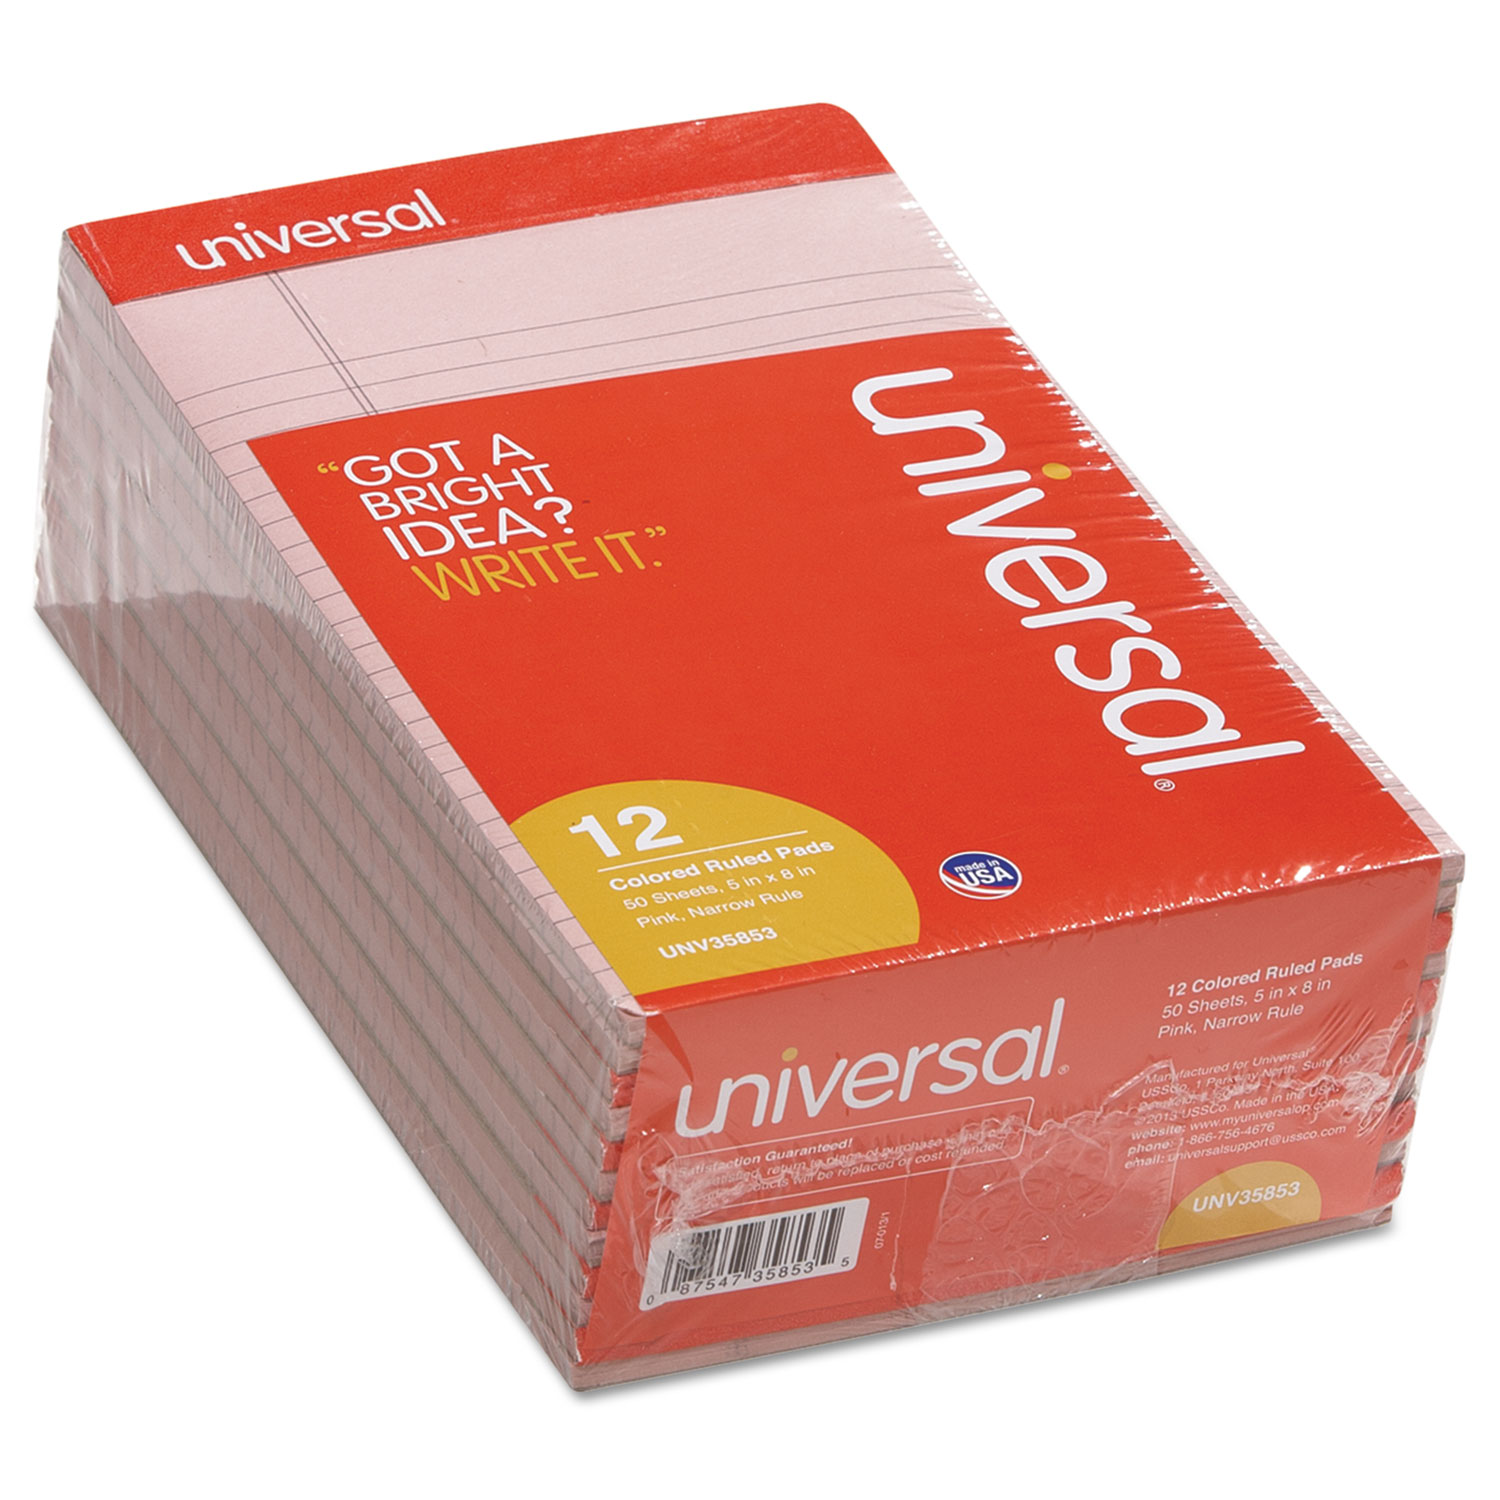  Universal UNV35853 Colored Perforated Writing Pads, Narrow Rule, 5 x 8, Pink, 50 Sheets, Dozen (UNV35853) 